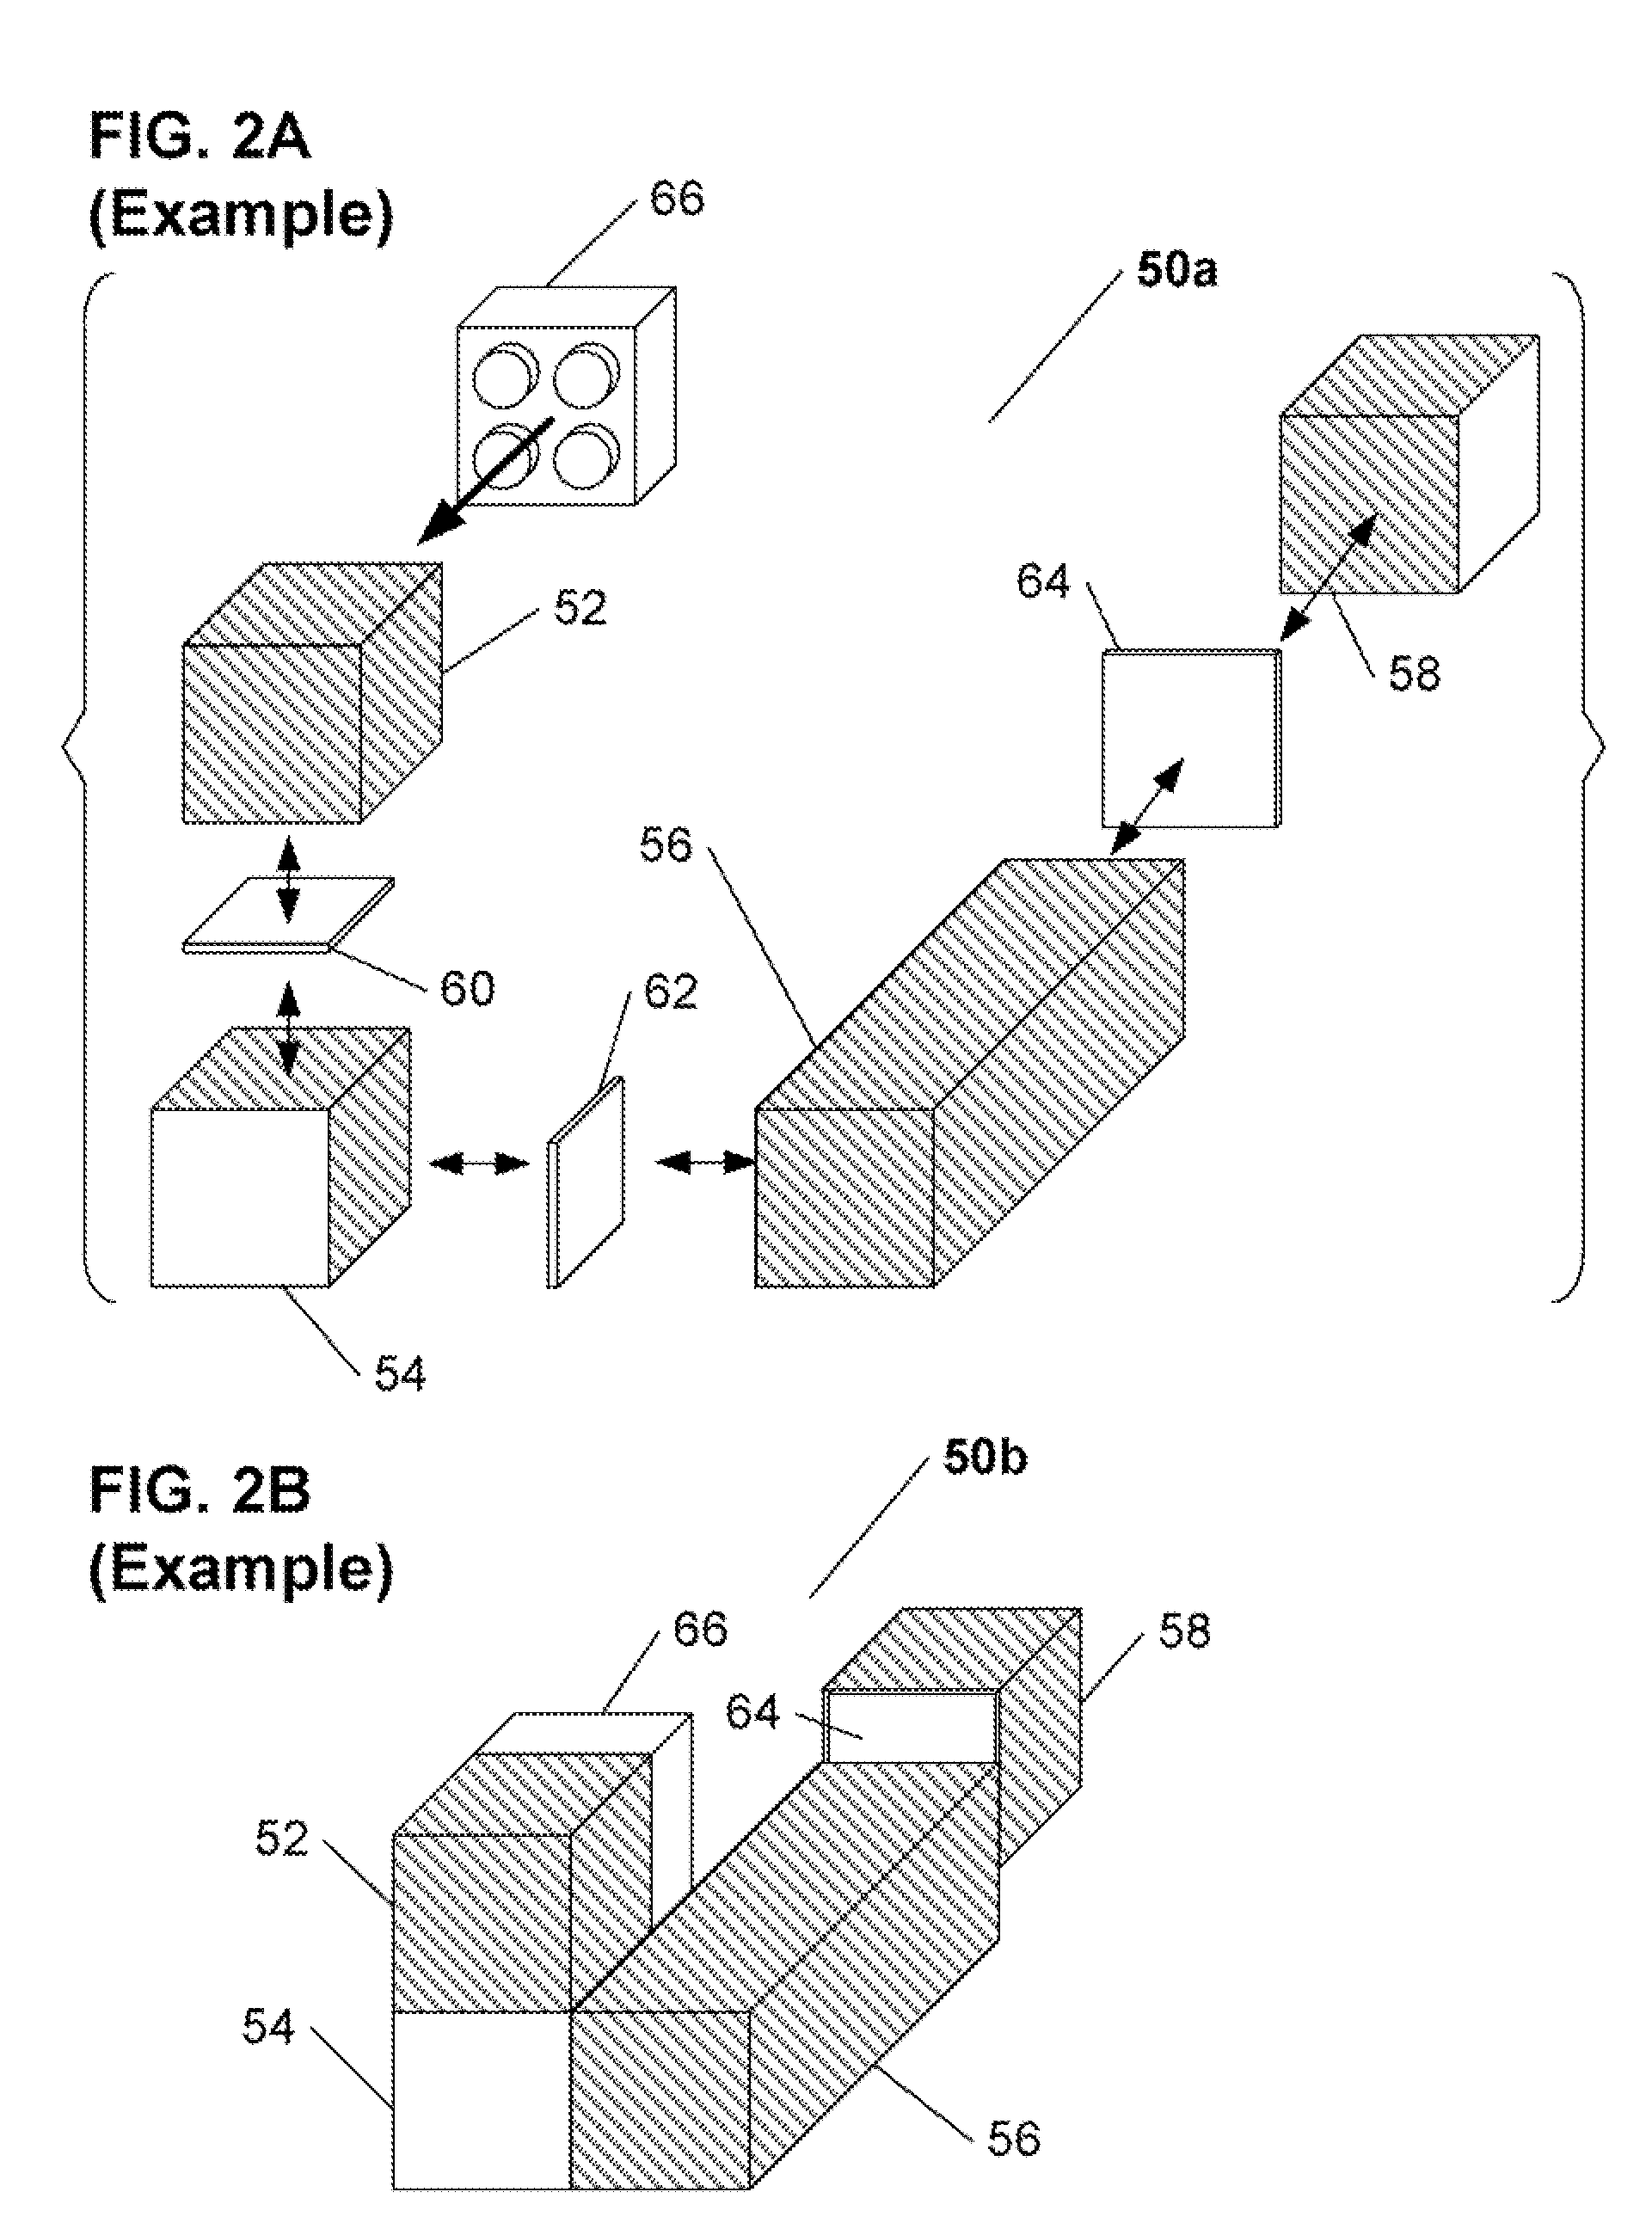 Modular construction system utilizing versatile construction elements with multi-directional connective surfaces and releasable interconnect elements